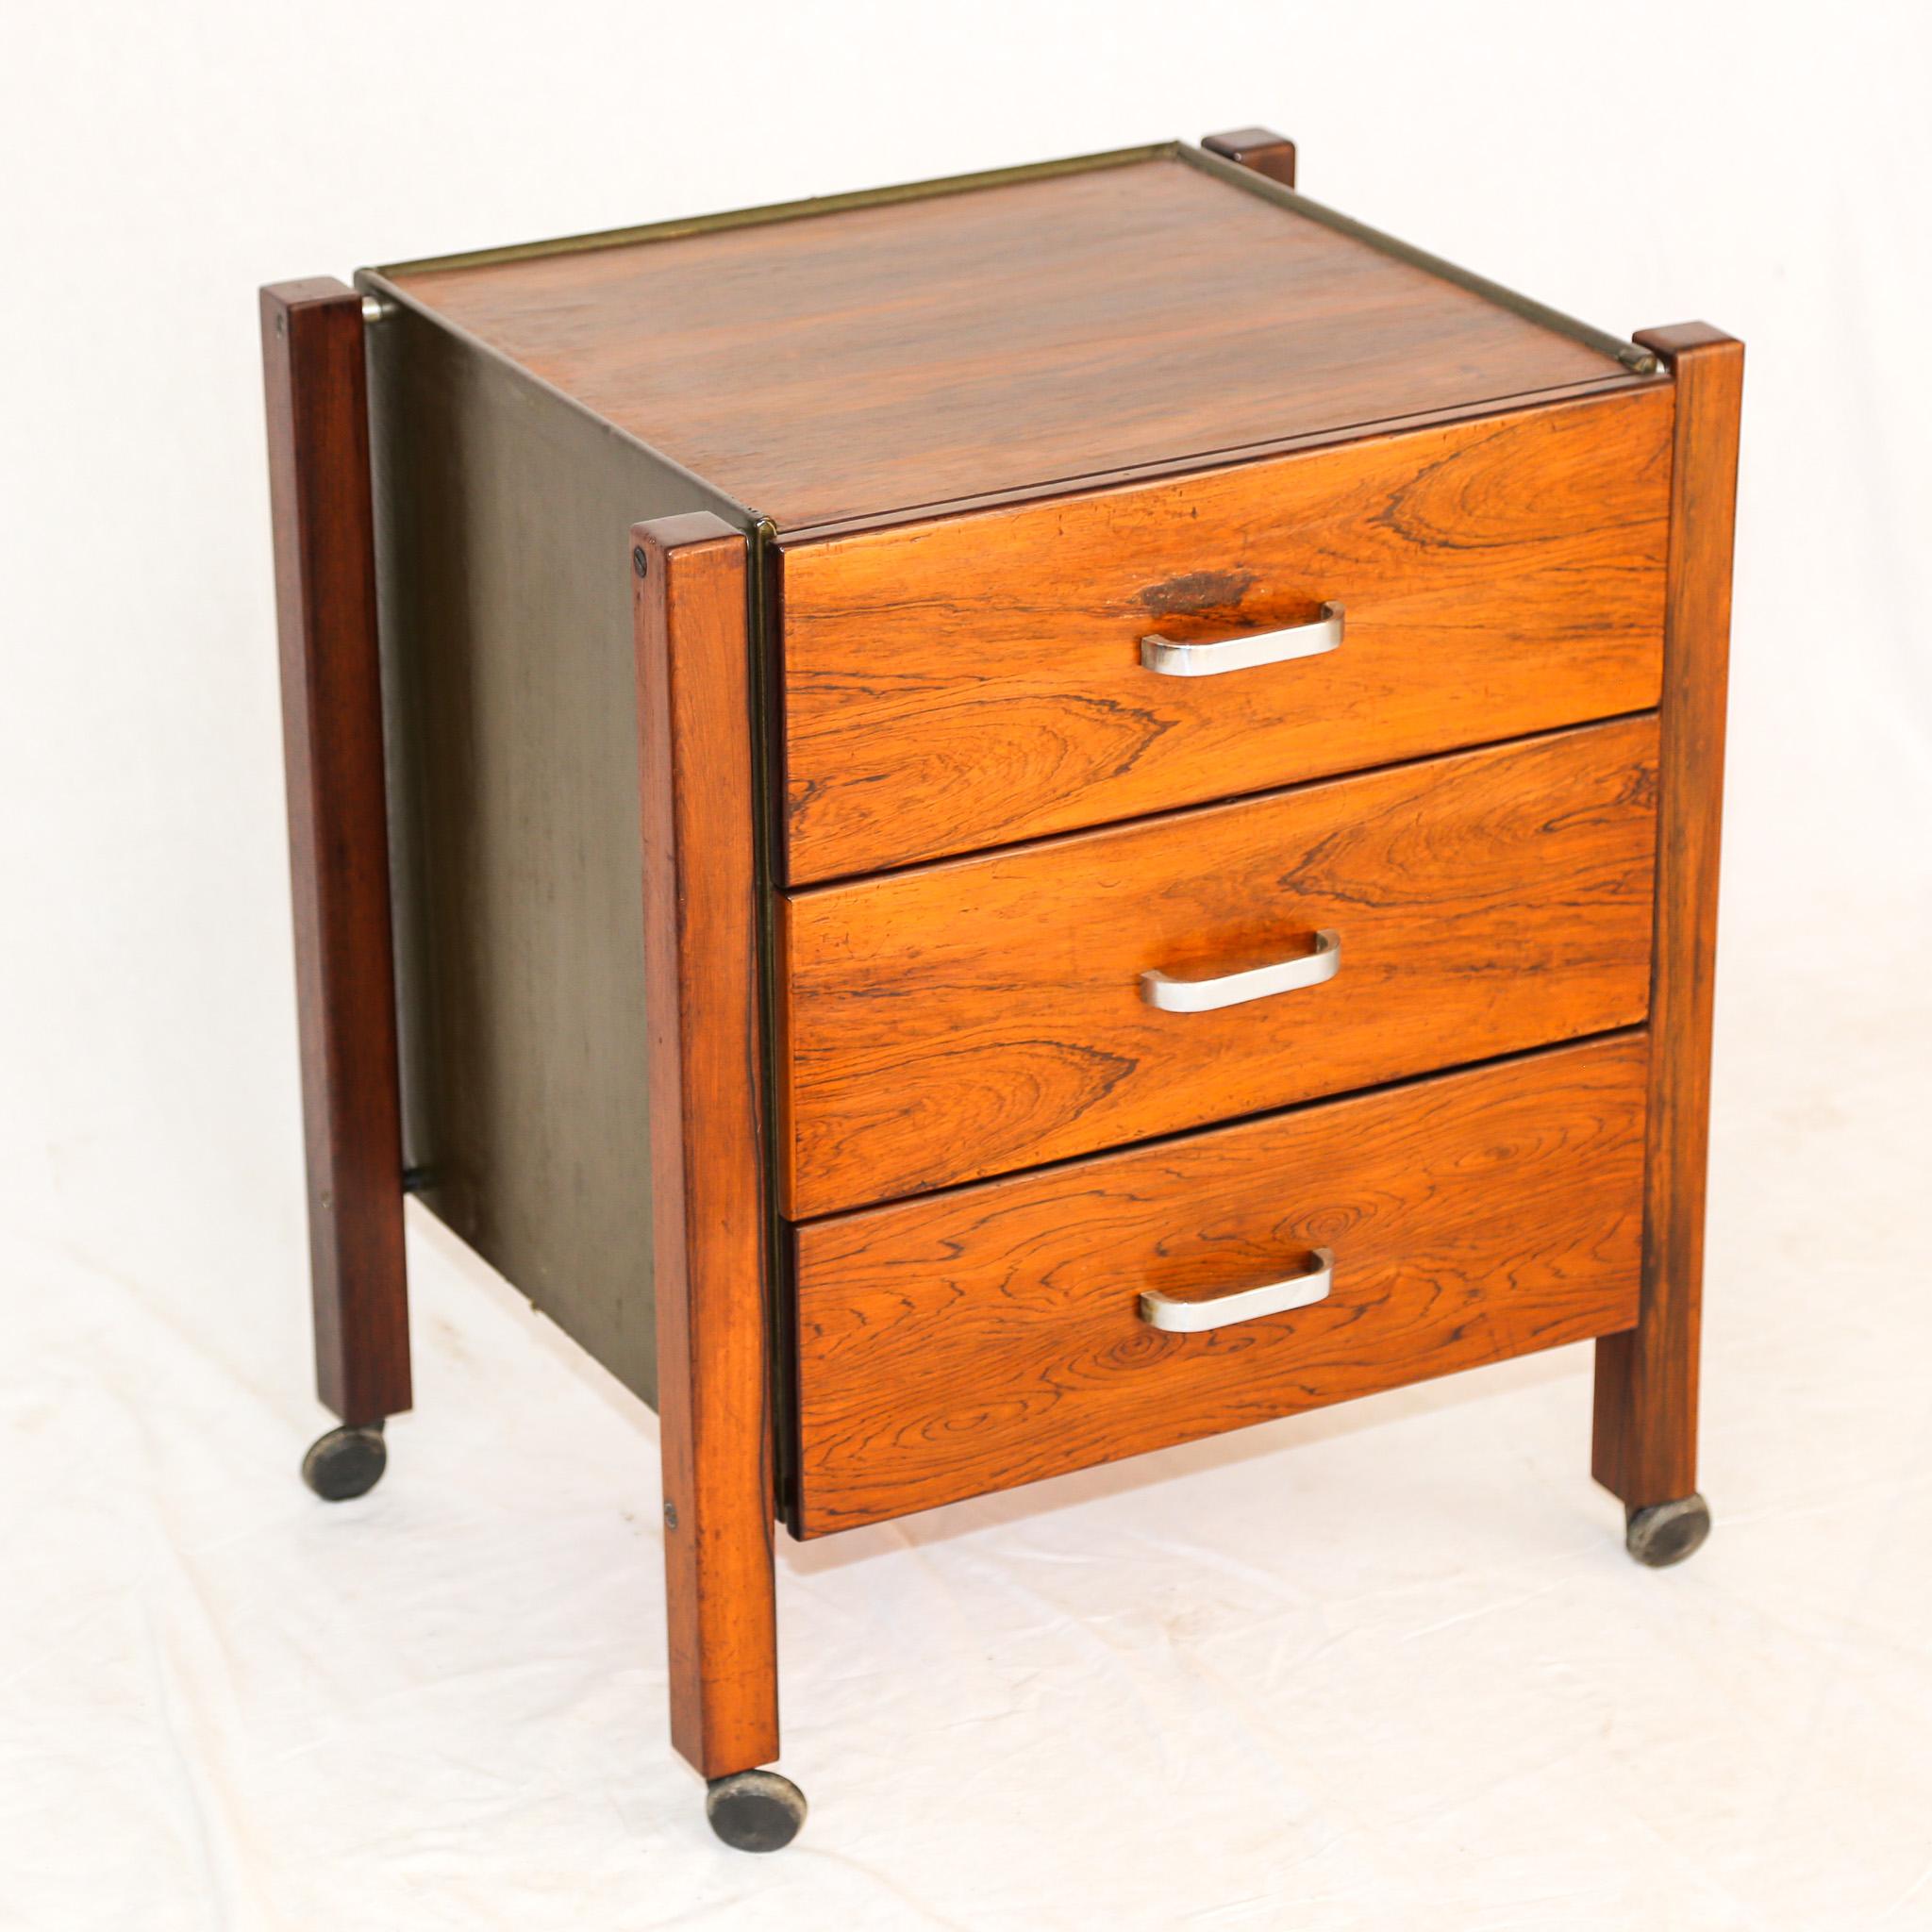 Available today, this Brazilian modern filing cabinet in Brazilian rosewood and leather is a true beauty. This filing cabinet was designed by Jorge Zalszupin and has three drawers with a metal handle, four wheels, and leather on the outside frame.